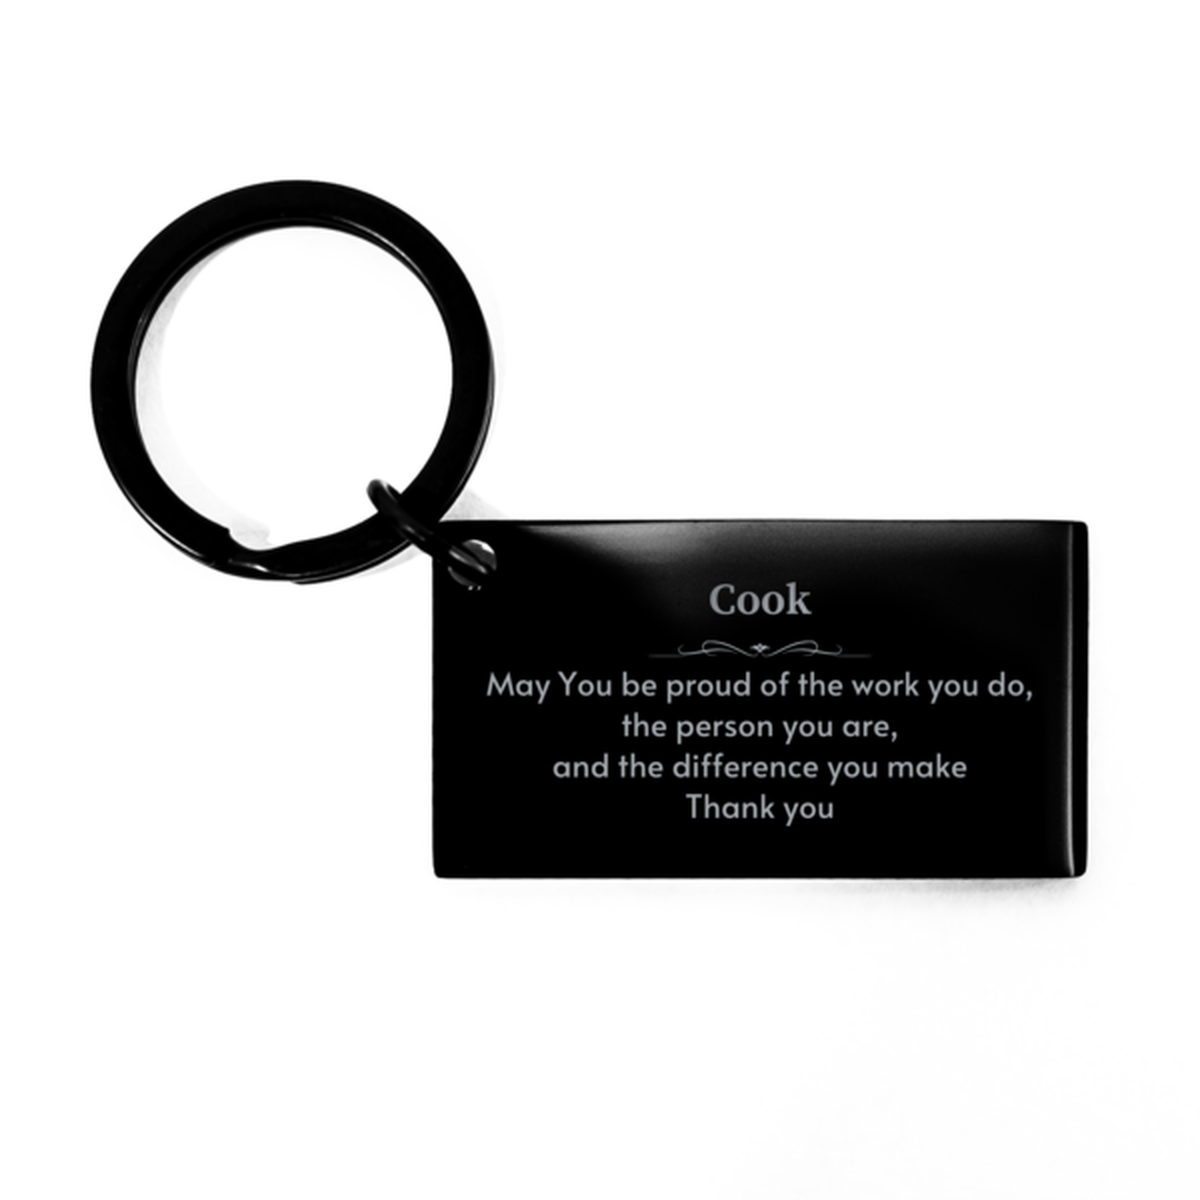 Heartwarming Keychain Retirement Coworkers Gifts for Cook, Executive Assistant May You be proud of the work you do, the person you are Gifts for Boss Men Women Friends